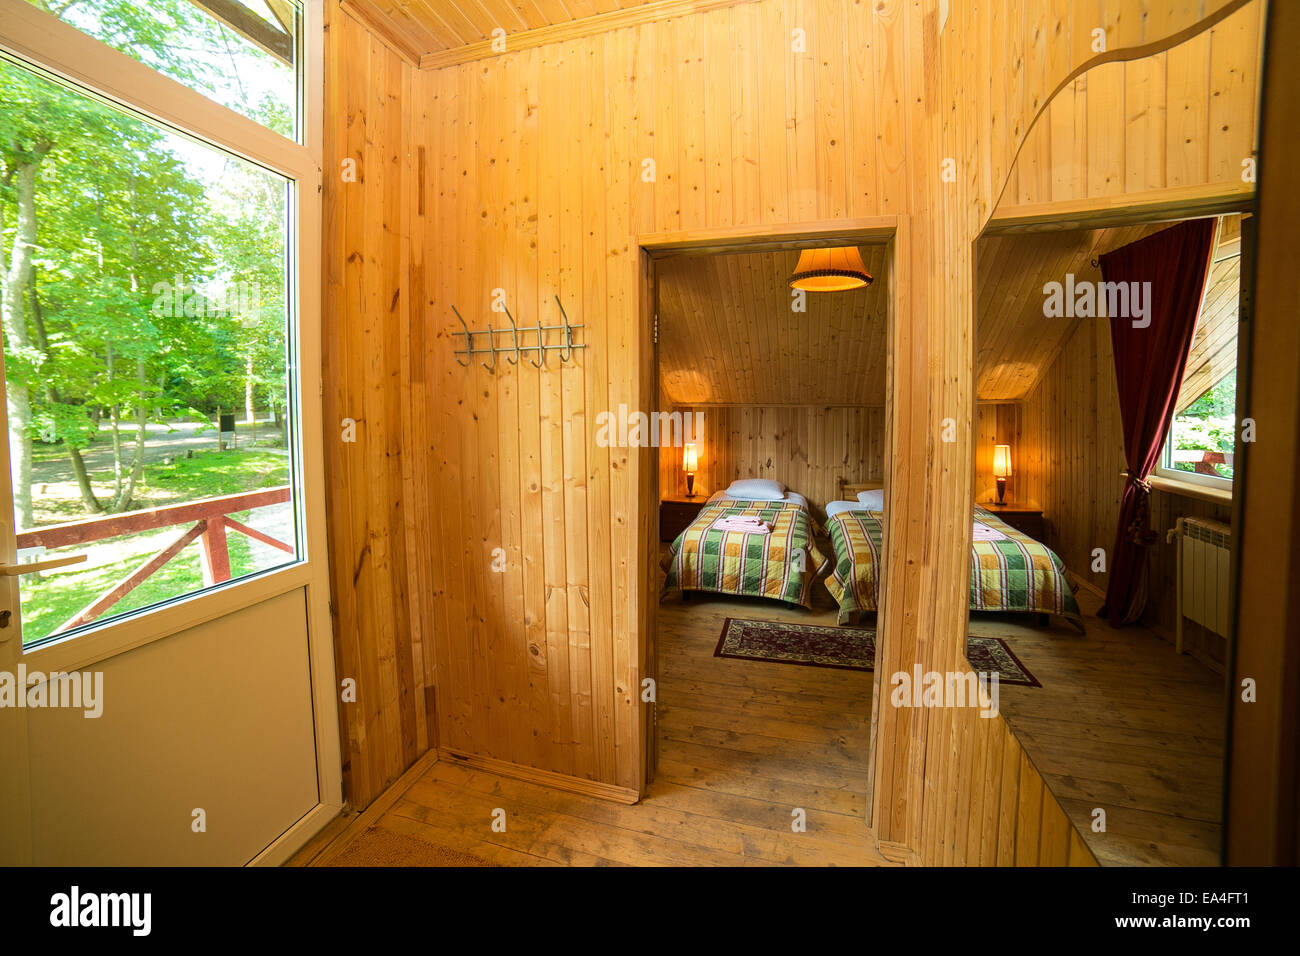 Interior of wooden house Stock Photo